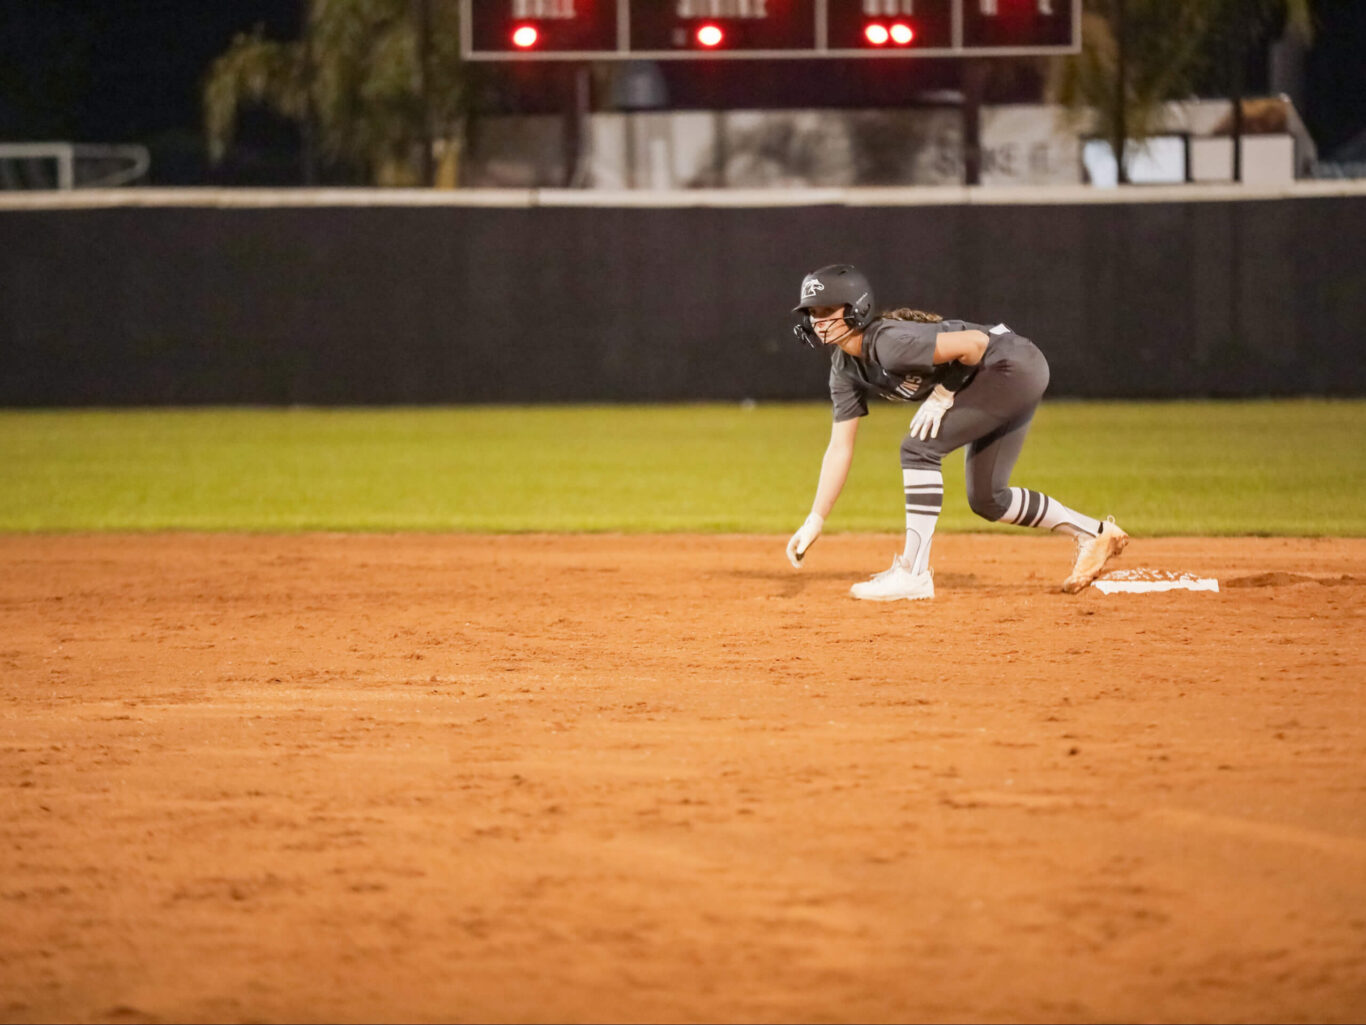 A softball player, preferably a girl, is reaching for a base on a dirt field.